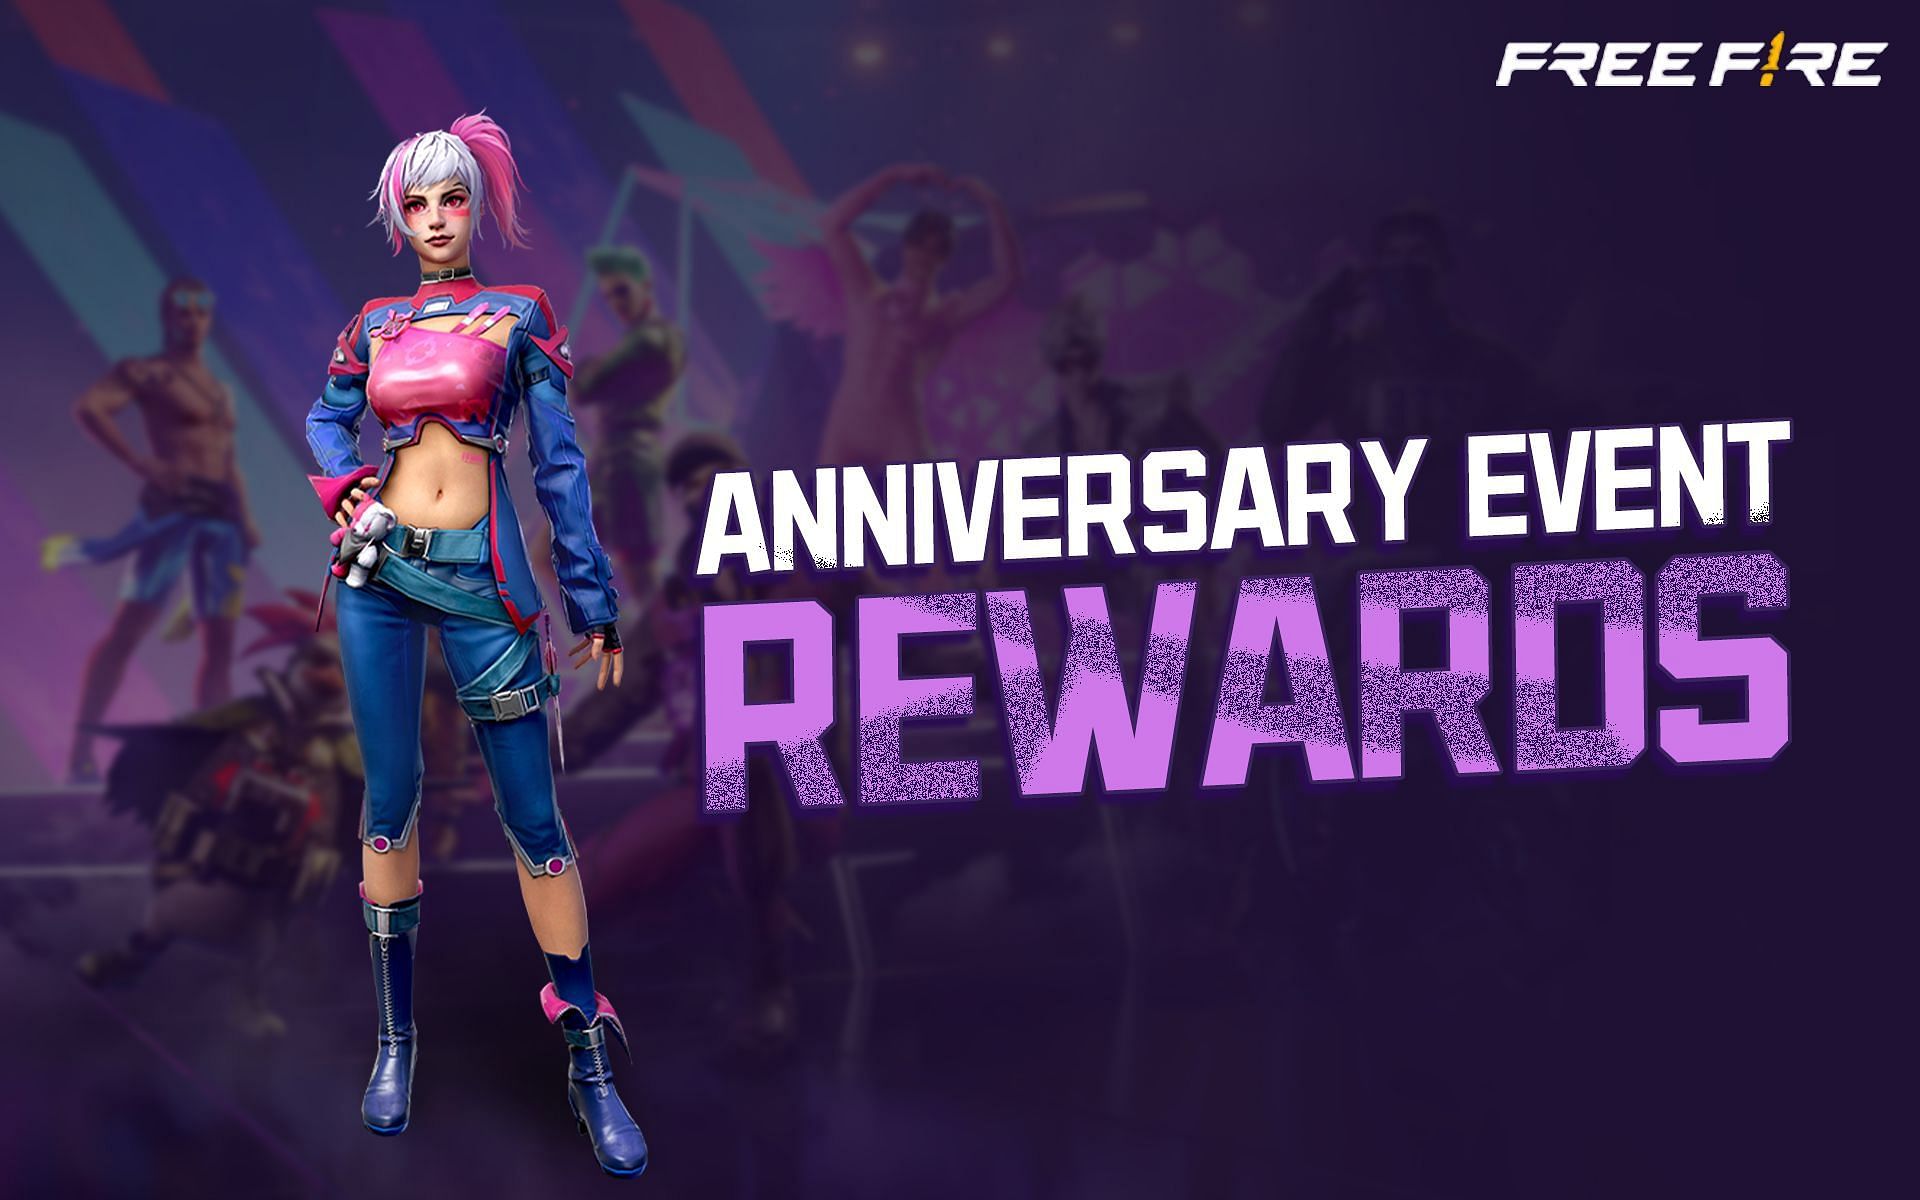 Rewards of the 5th anniversary events of Free Fire have been revealed (Image via Garena)